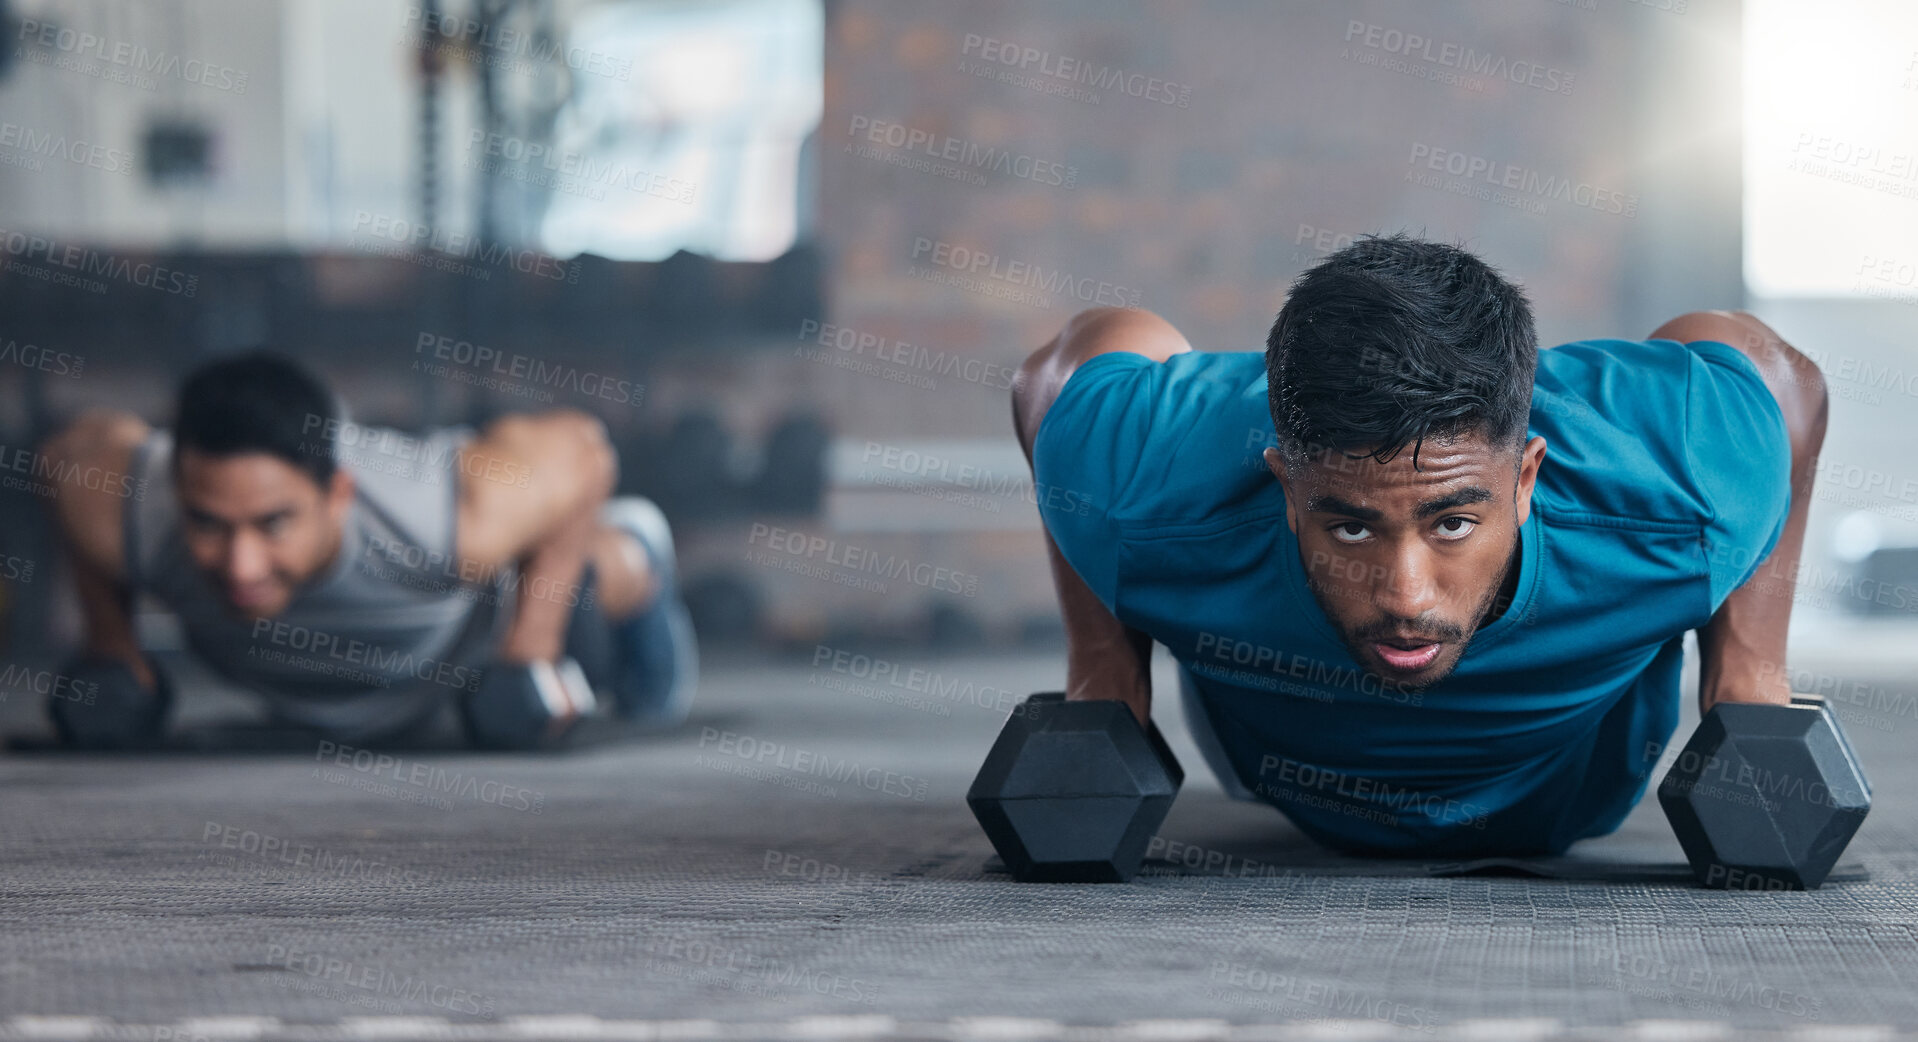 Buy stock photo Fitness, dumbbell weights and men doing a push up exercise for strength, health and wellness in a gym. Sports, motivation and athletes doing a workout or training routine together in a sport center.